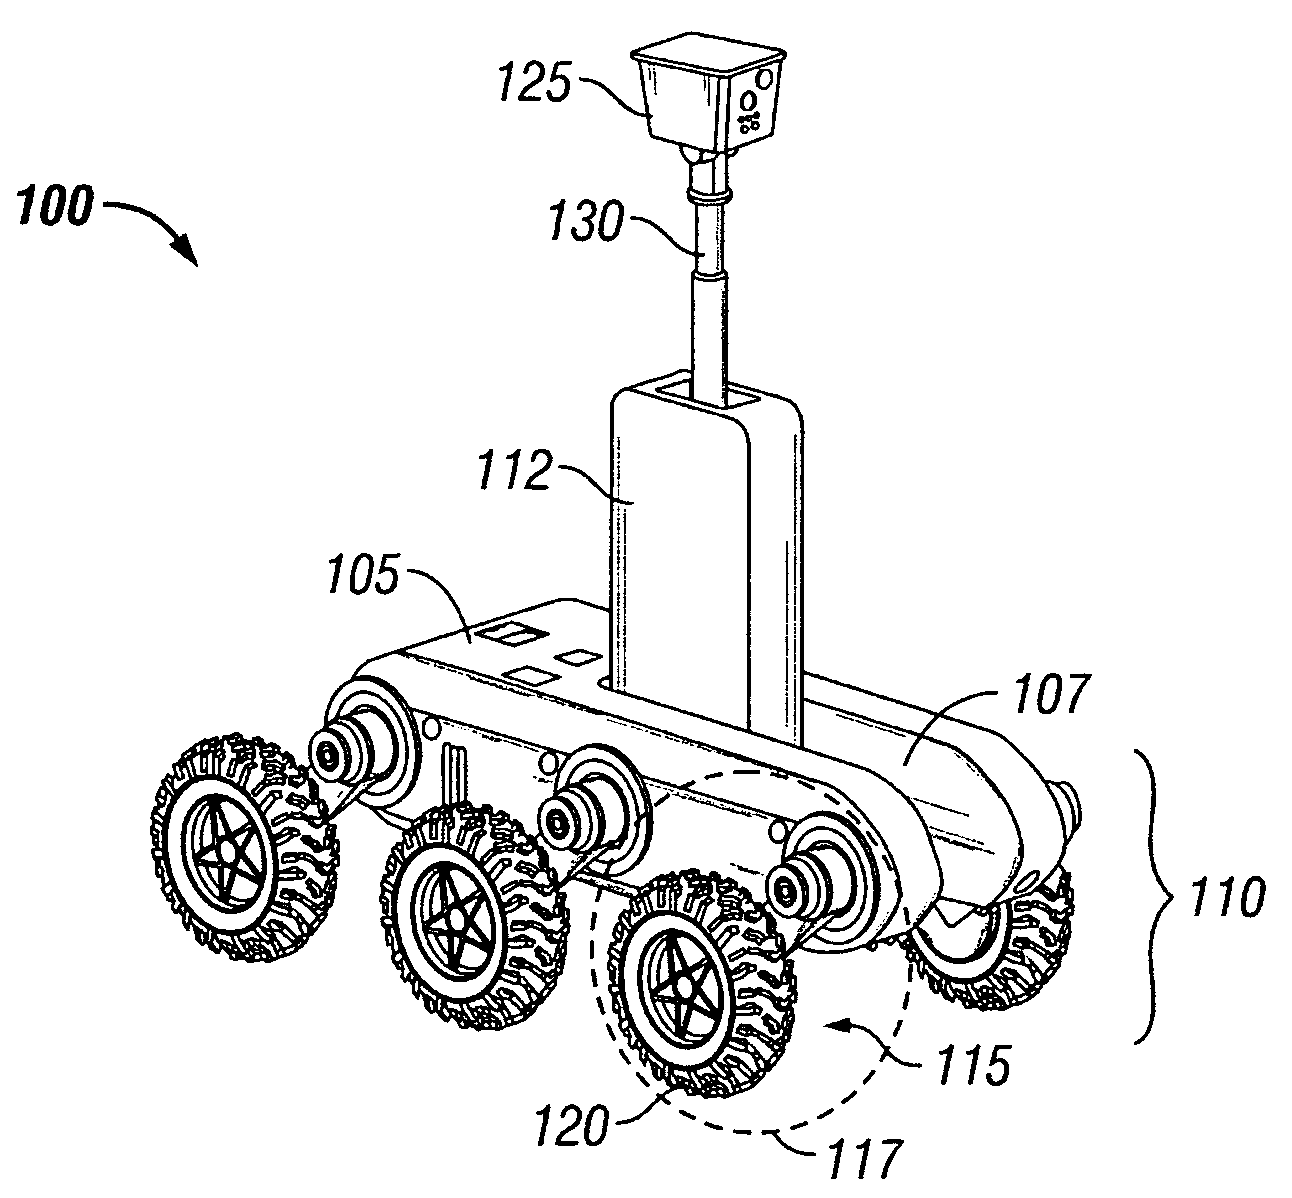 Payload module for mobility assist